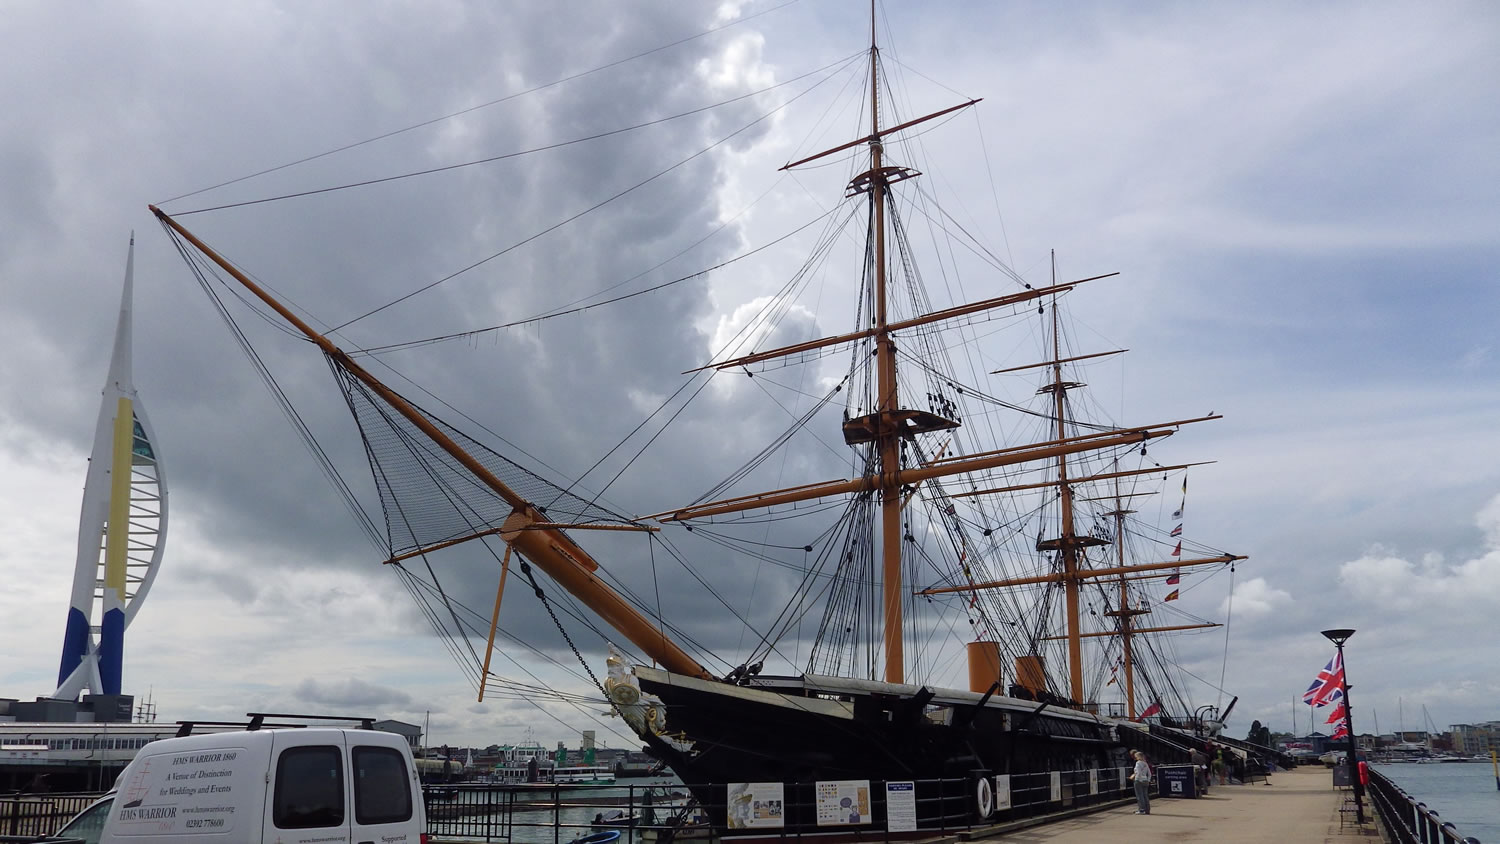 HMS Warrior one of the exhibits open to the public at Portsmouth Historic Dockyard and a contemporary of Robert Wilkinson's ship